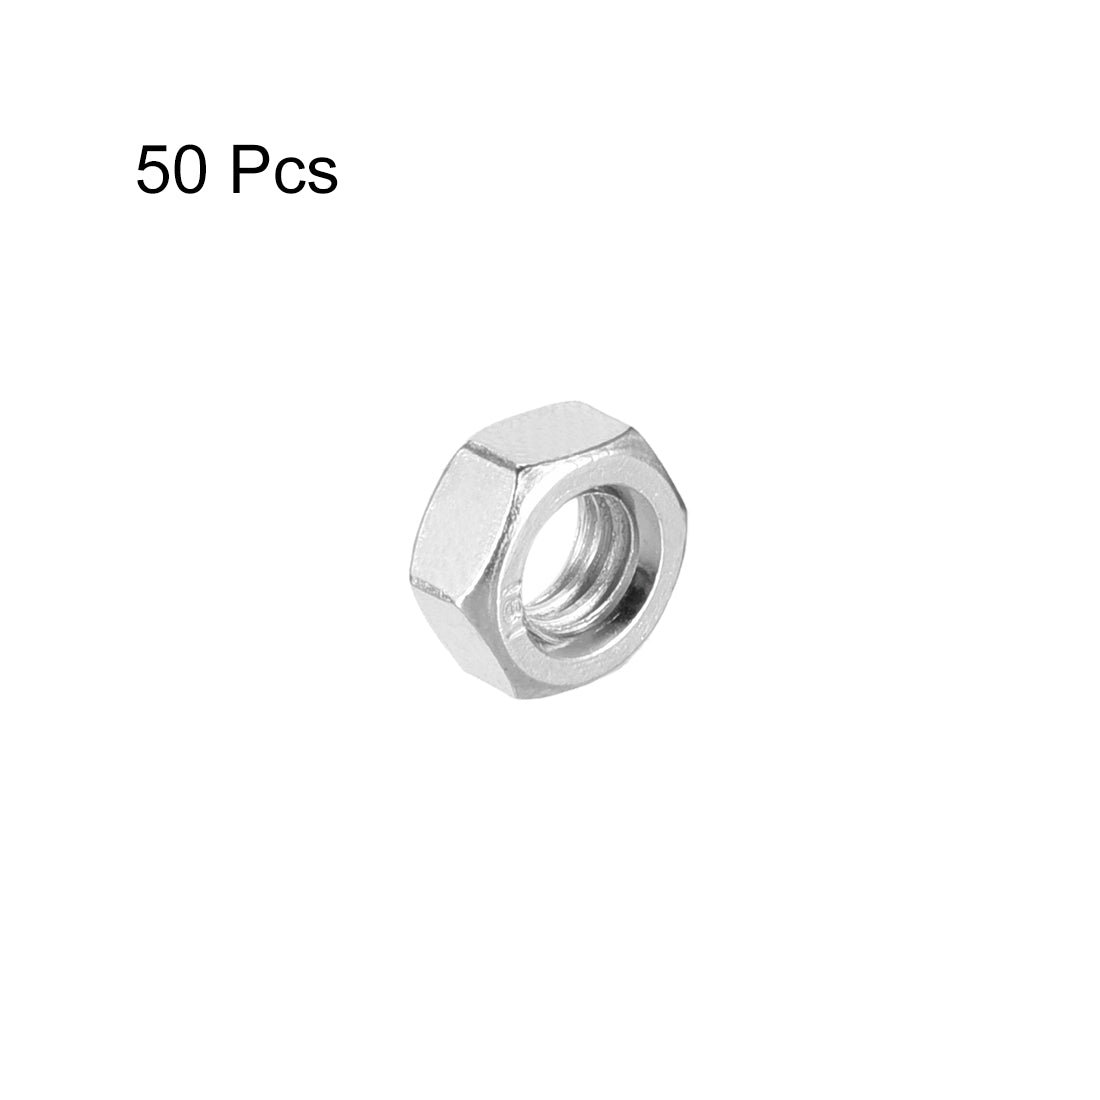 Uxcell Uxcell M6 Nickel Plating Metric Carbon Steel Hexagon Hex Nut Silver Tone 50pcs